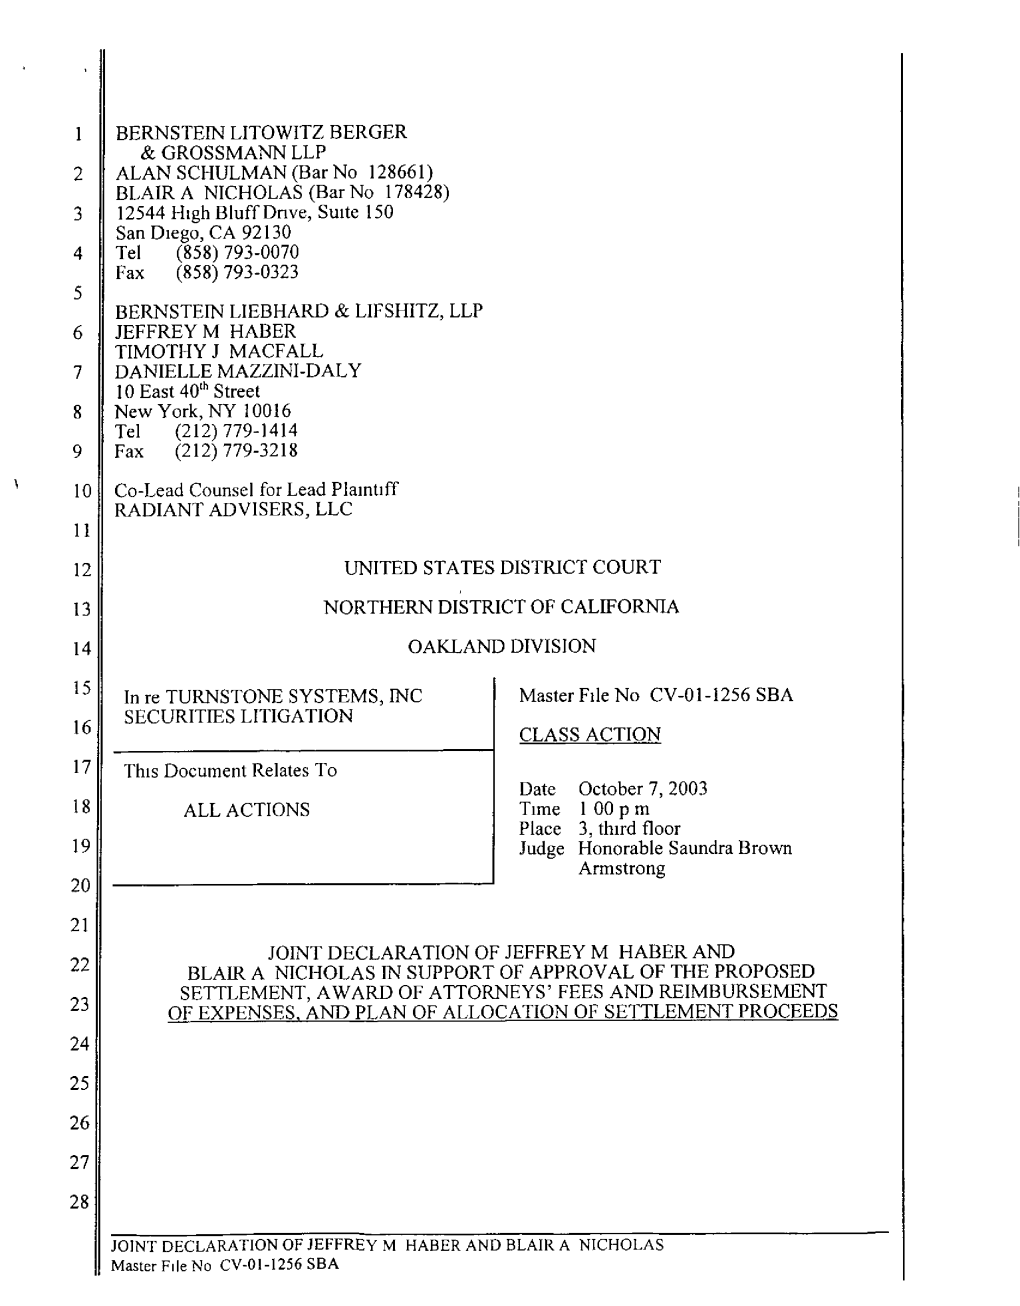 Turnstone Systems, Inc. Securities Litigation 01-CV-1256-Joint